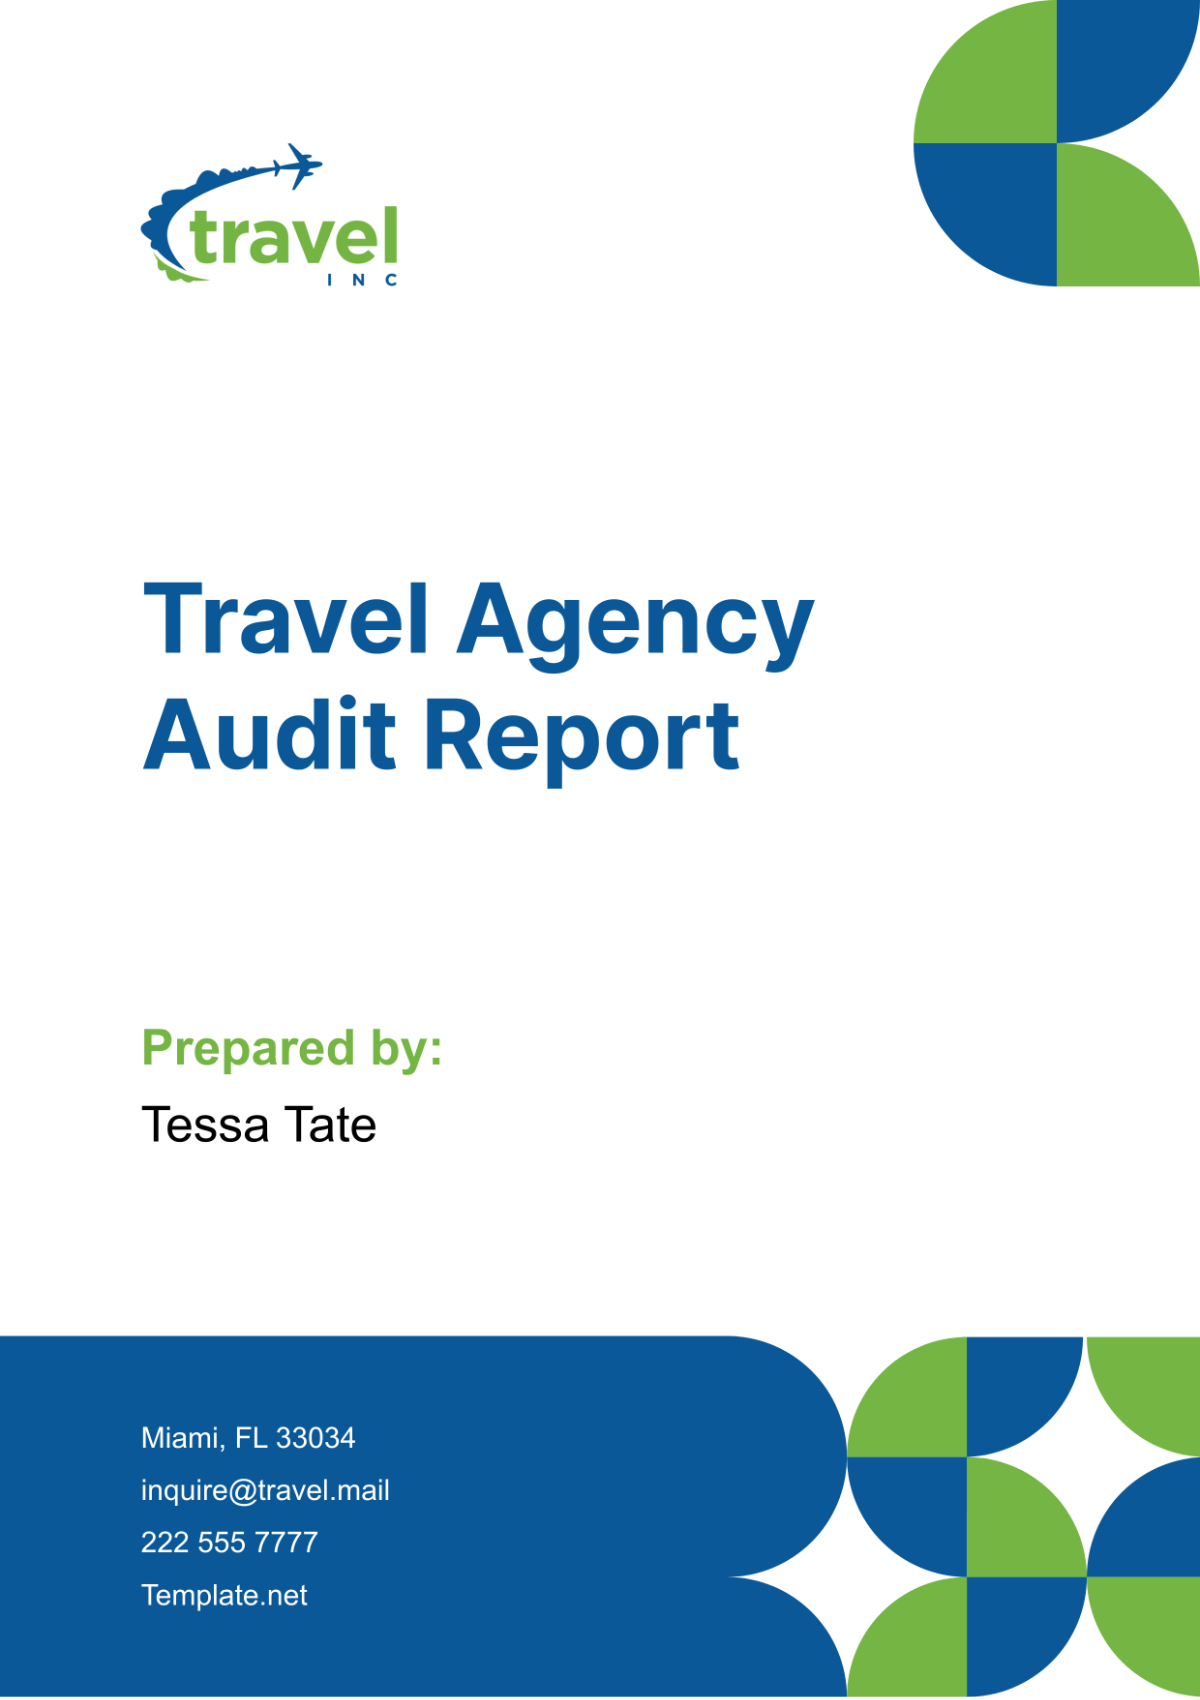 Travel Agency Audit Report Template